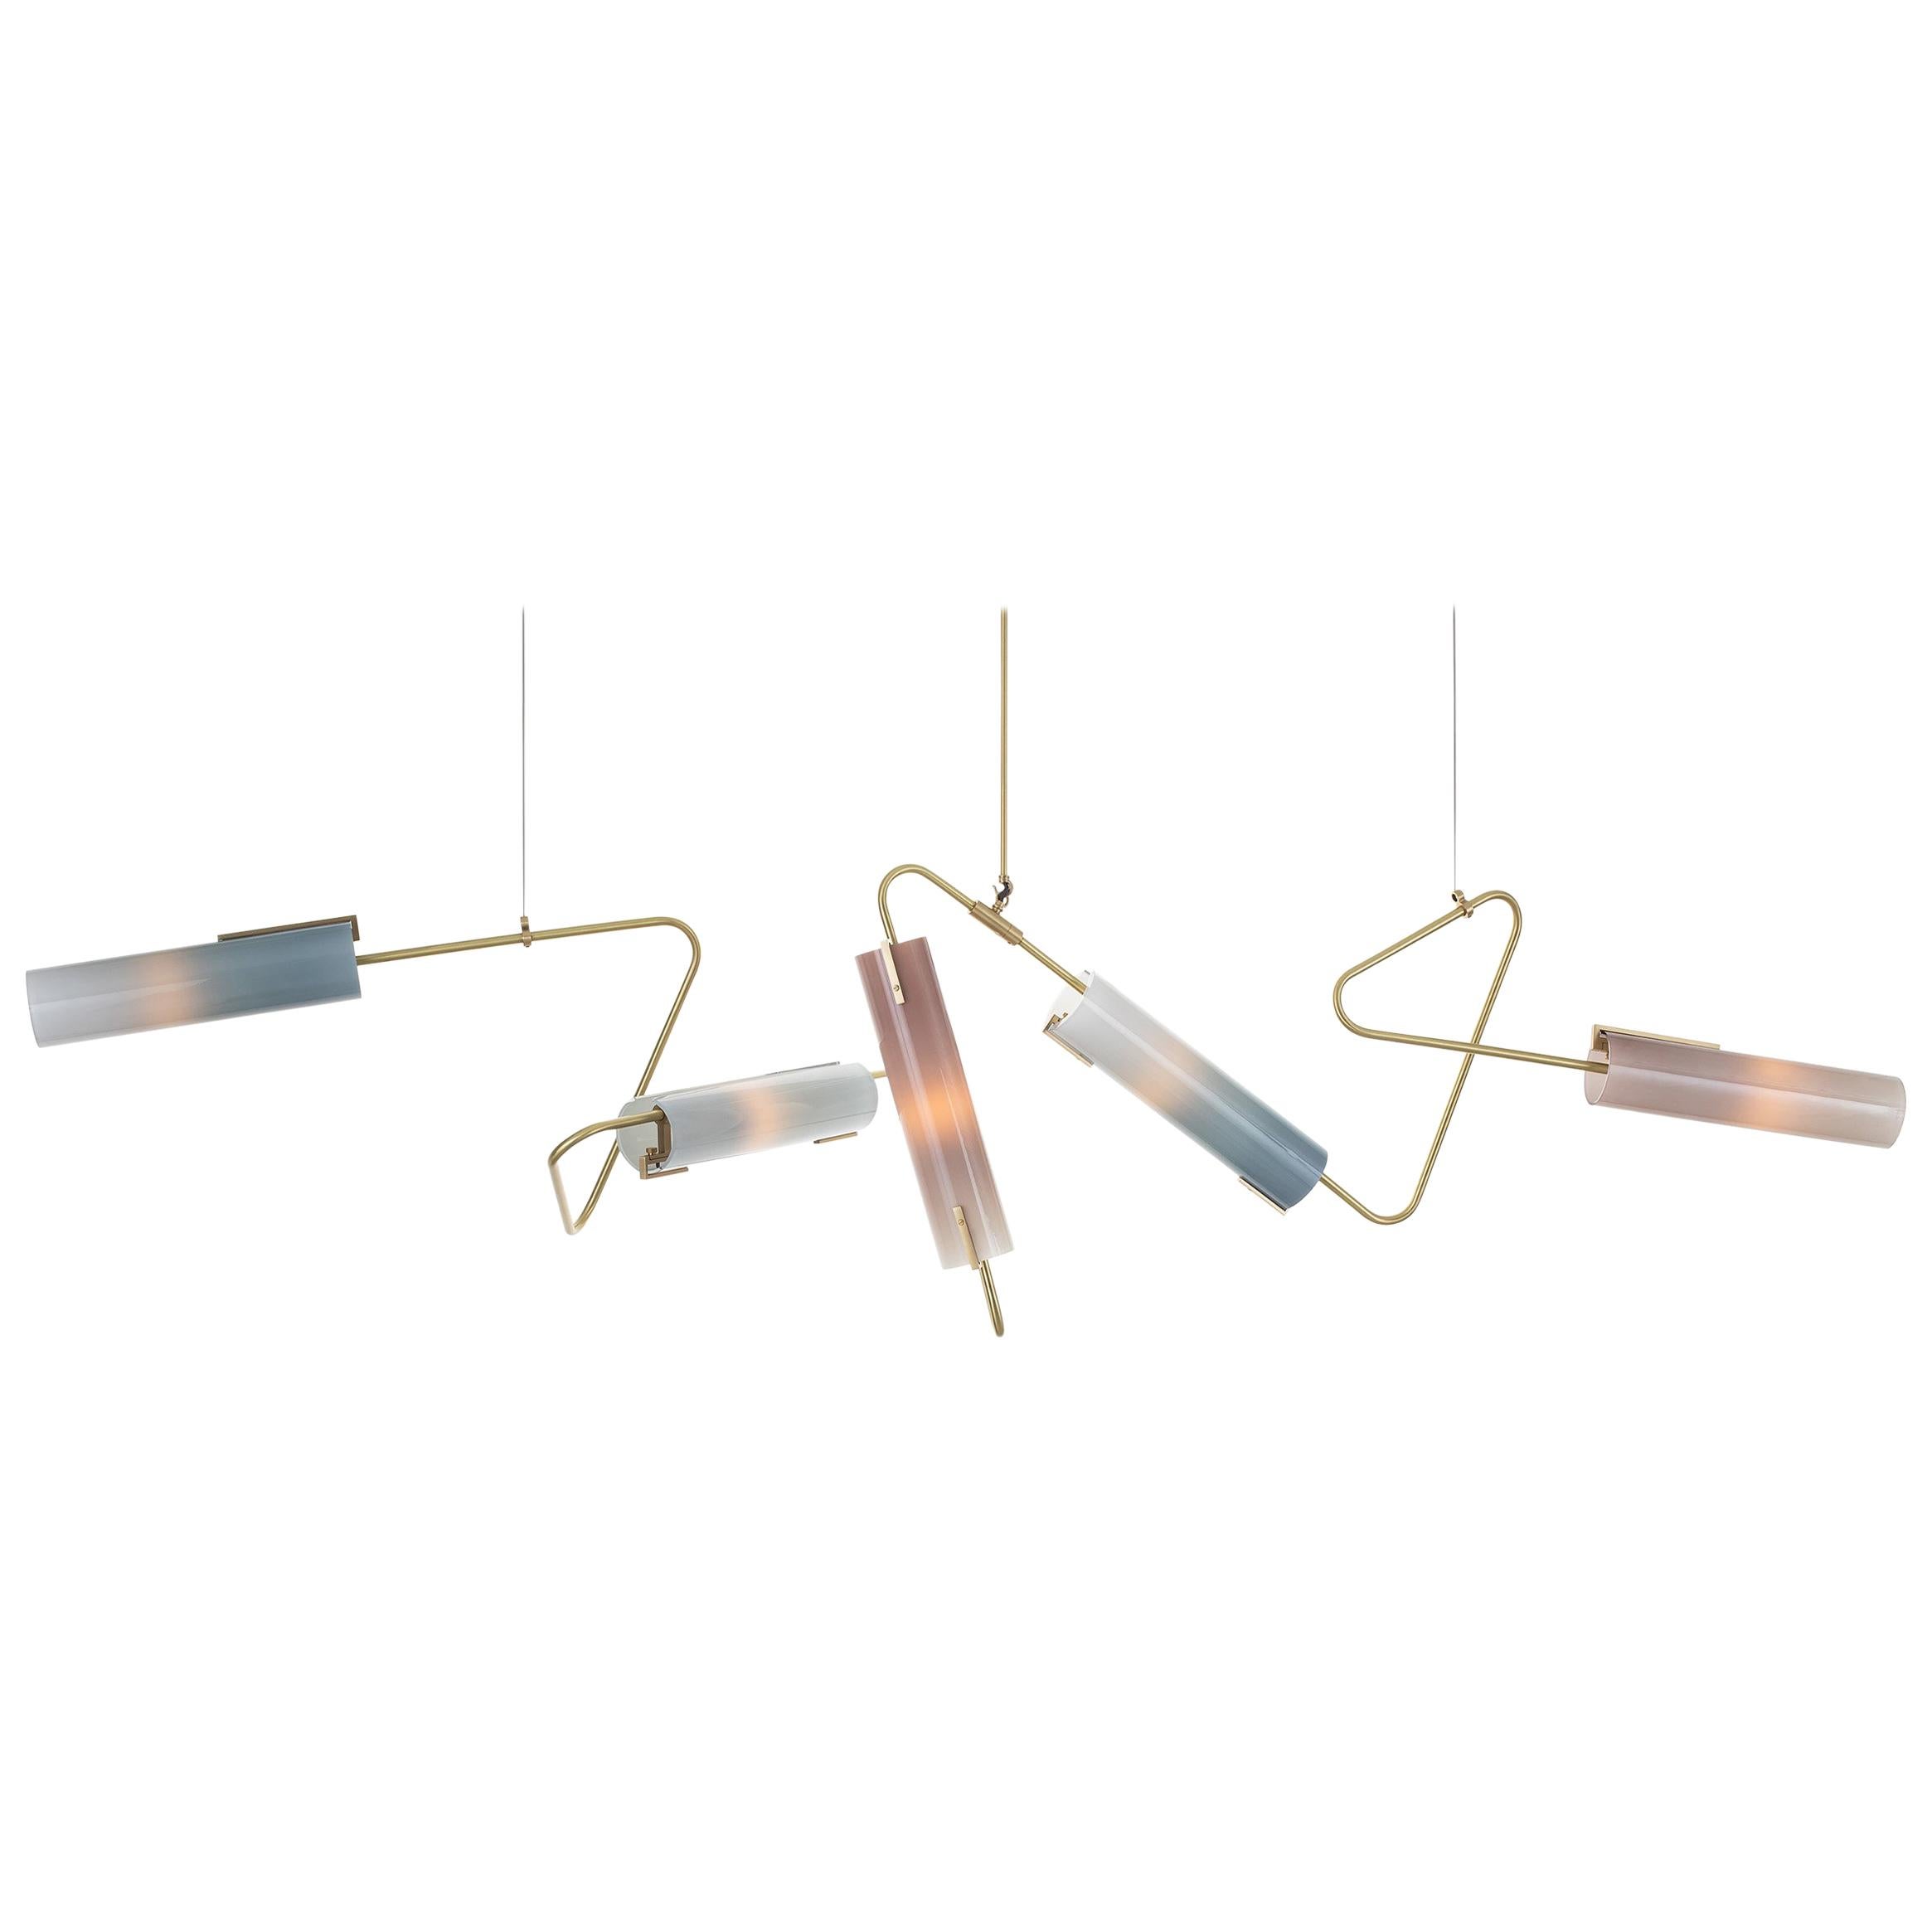 Continuum 85 Chandelier: Brass/Slate, Grey and Taupe Glass by Avram Rusu Studio For Sale